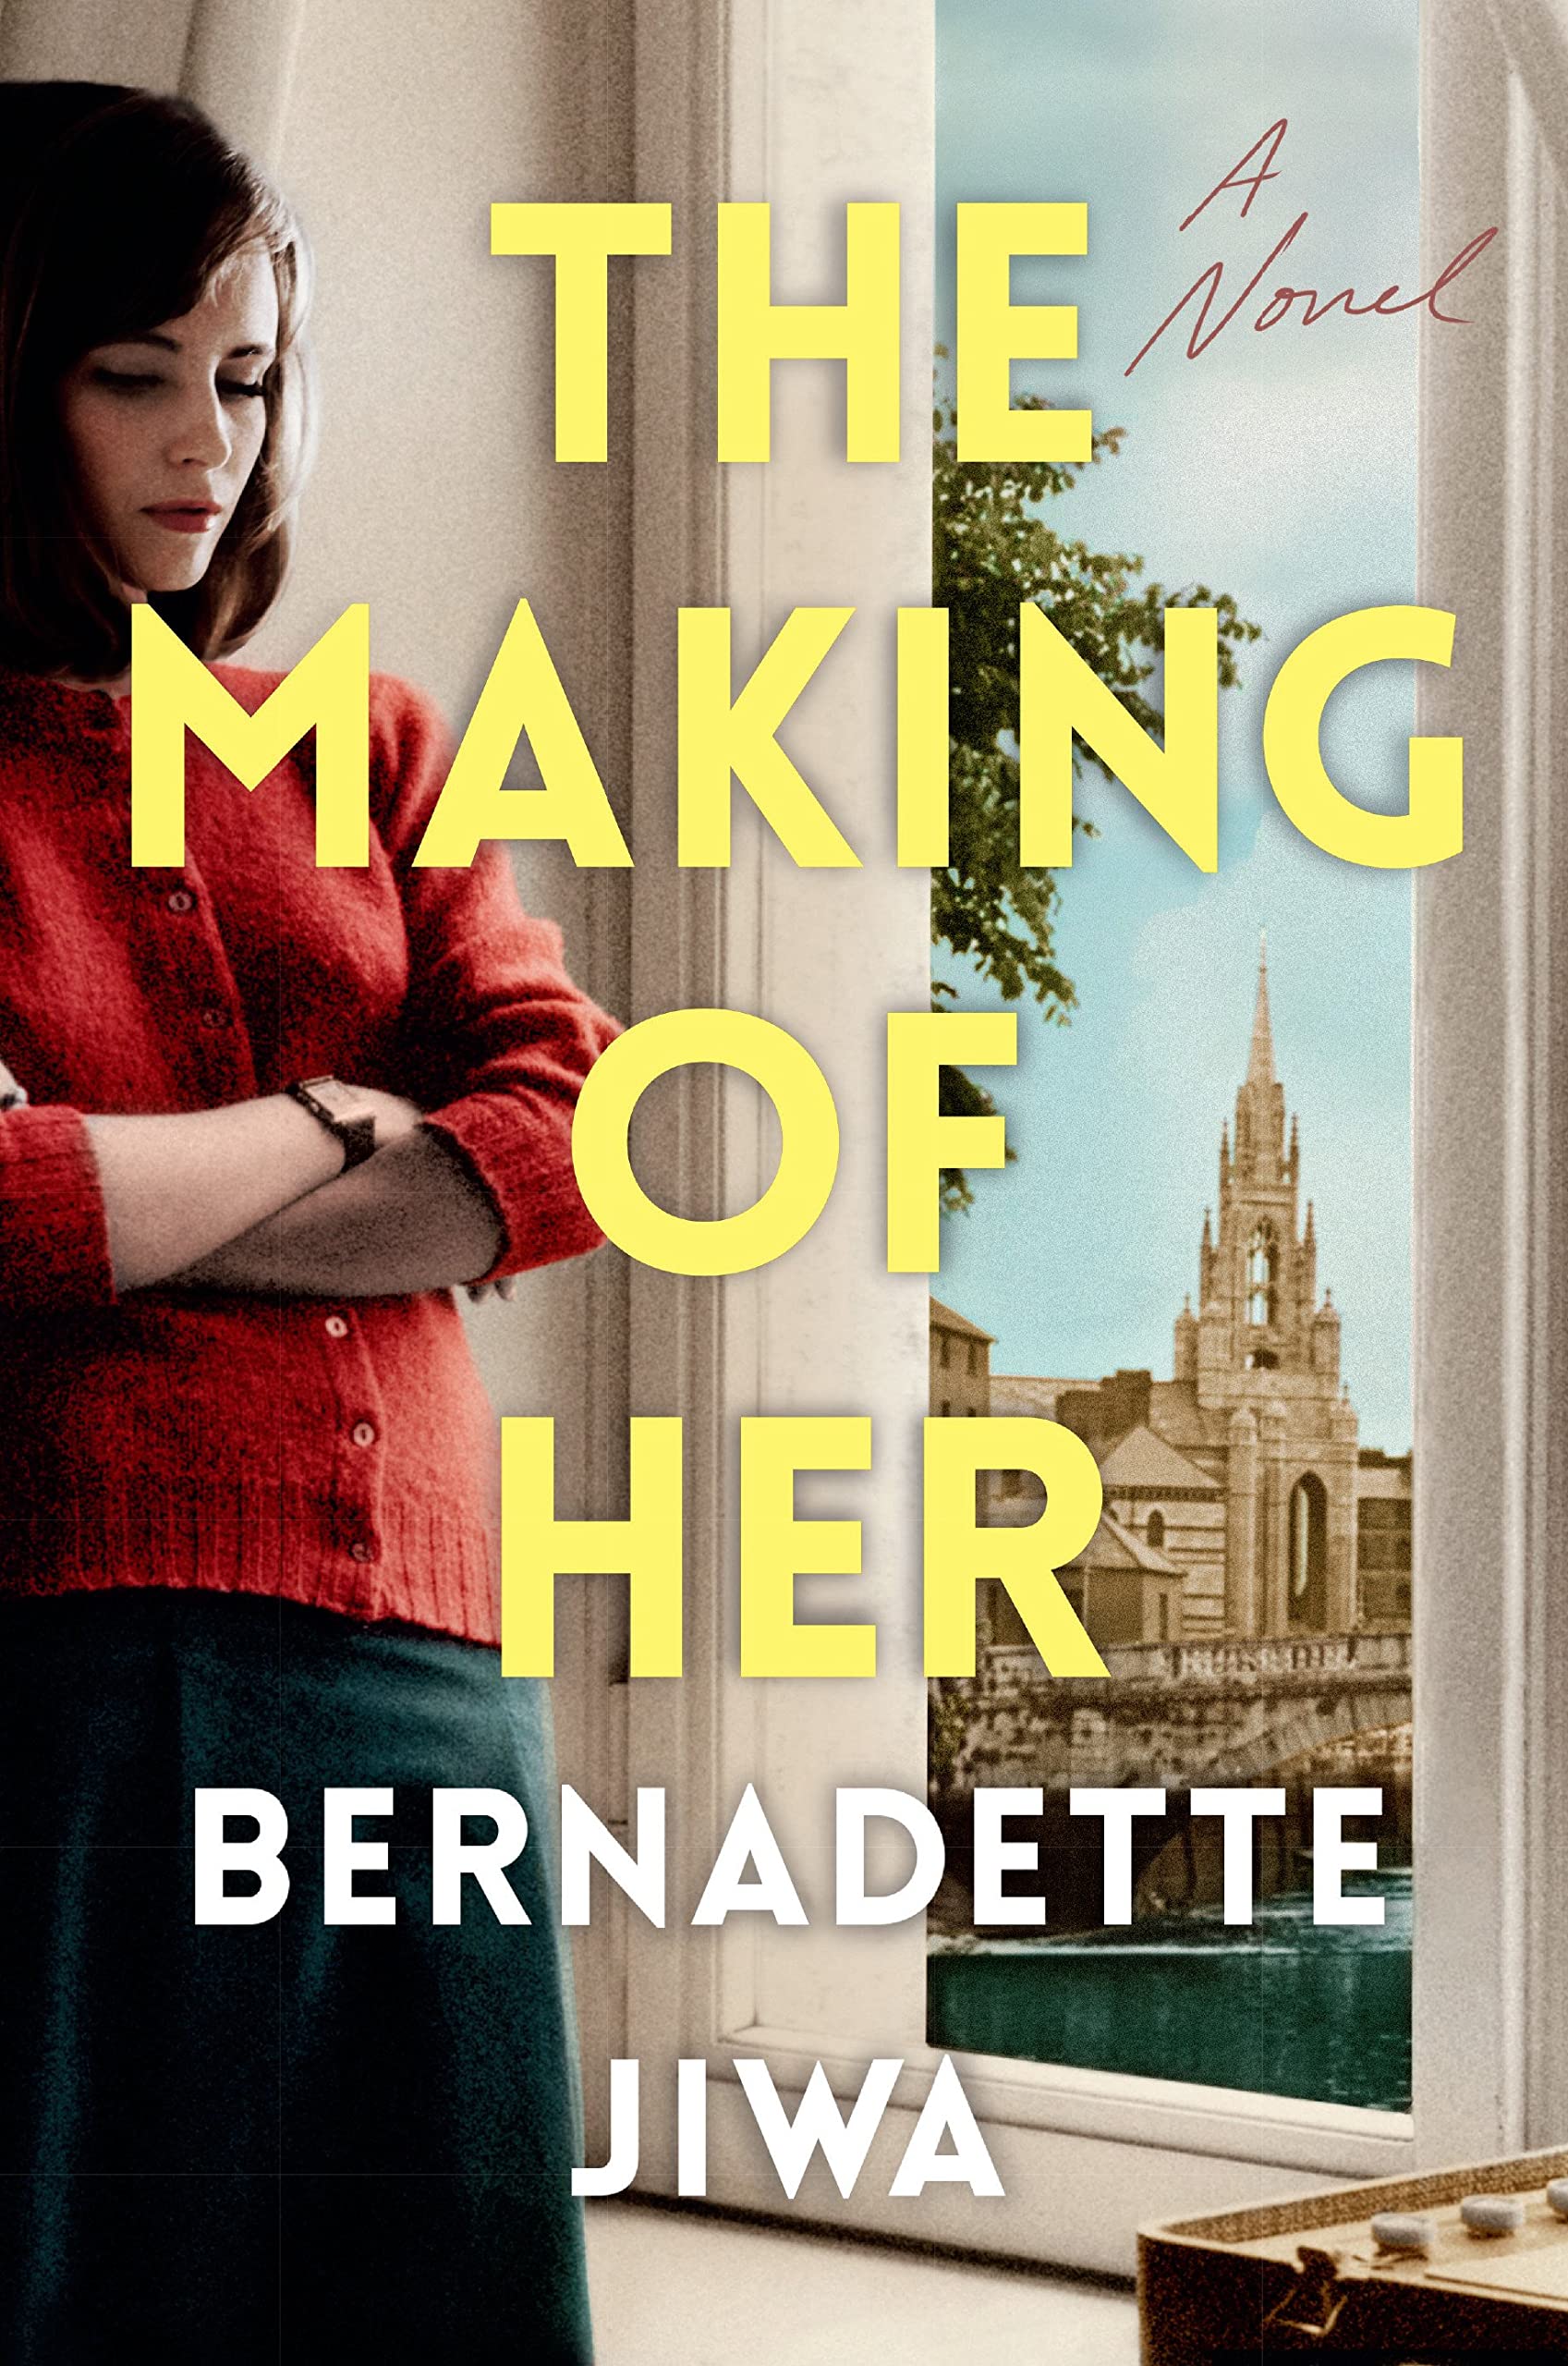 Image for "The Making of Her"